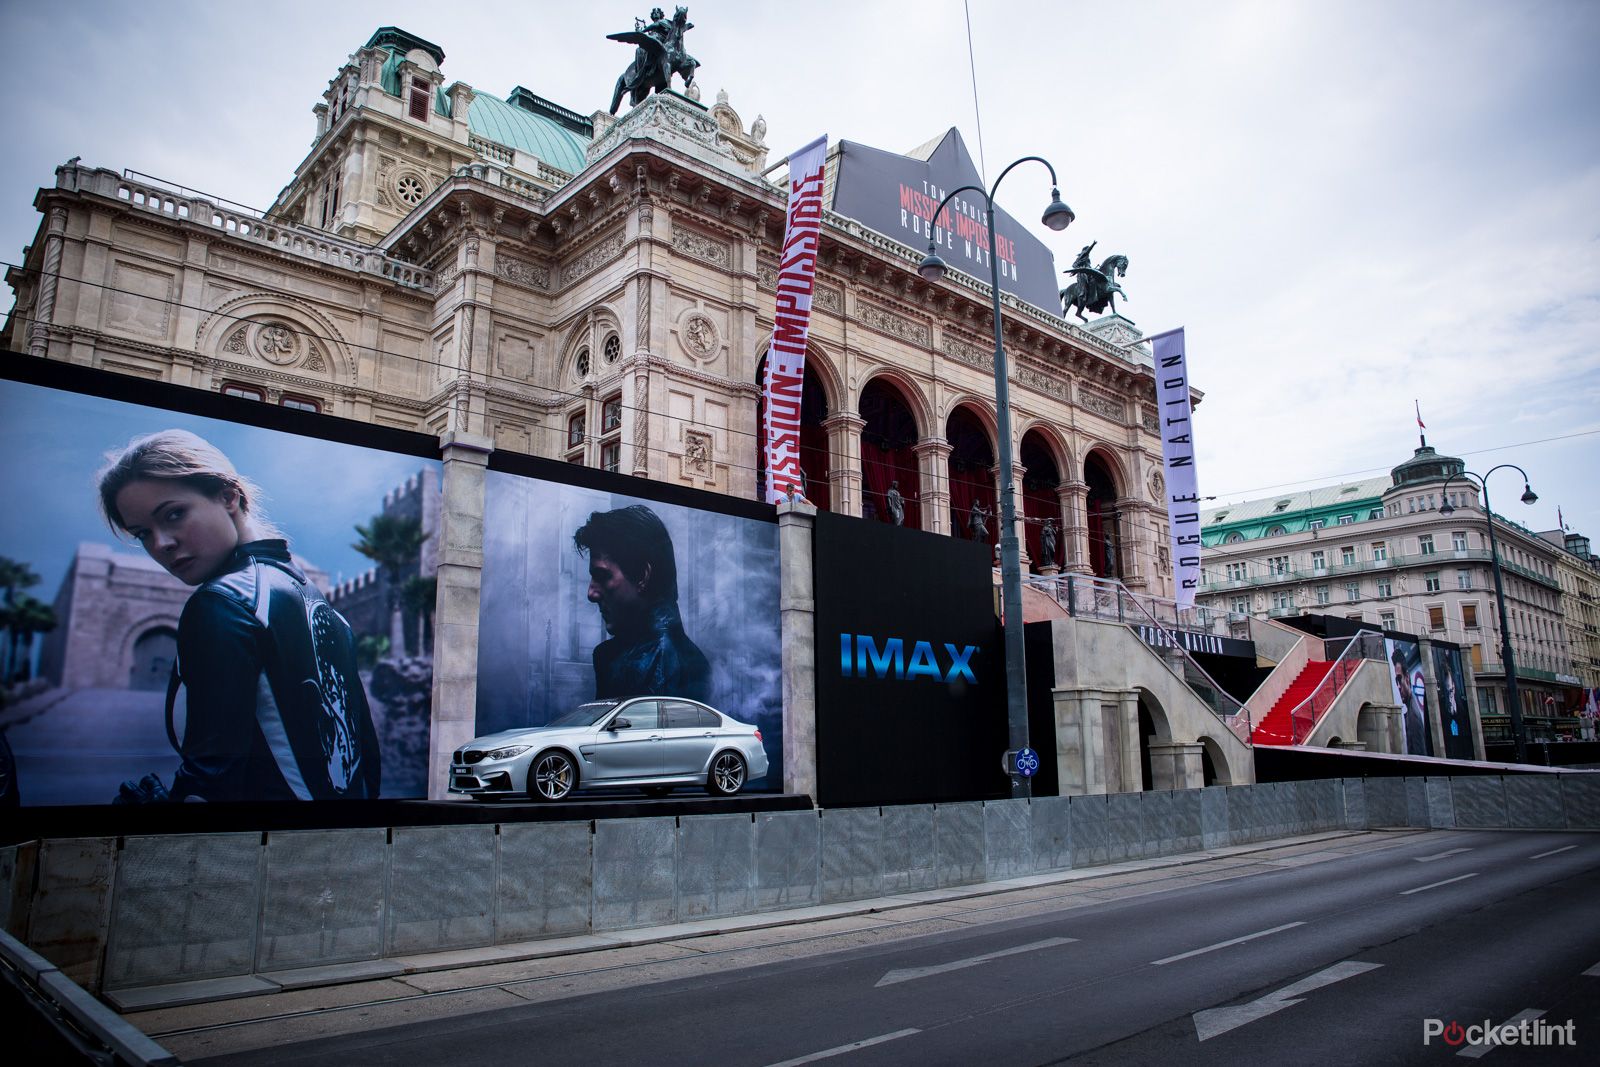 mission impossible how imax built a pop up cinema from scratch for rogue nation premiere image 1